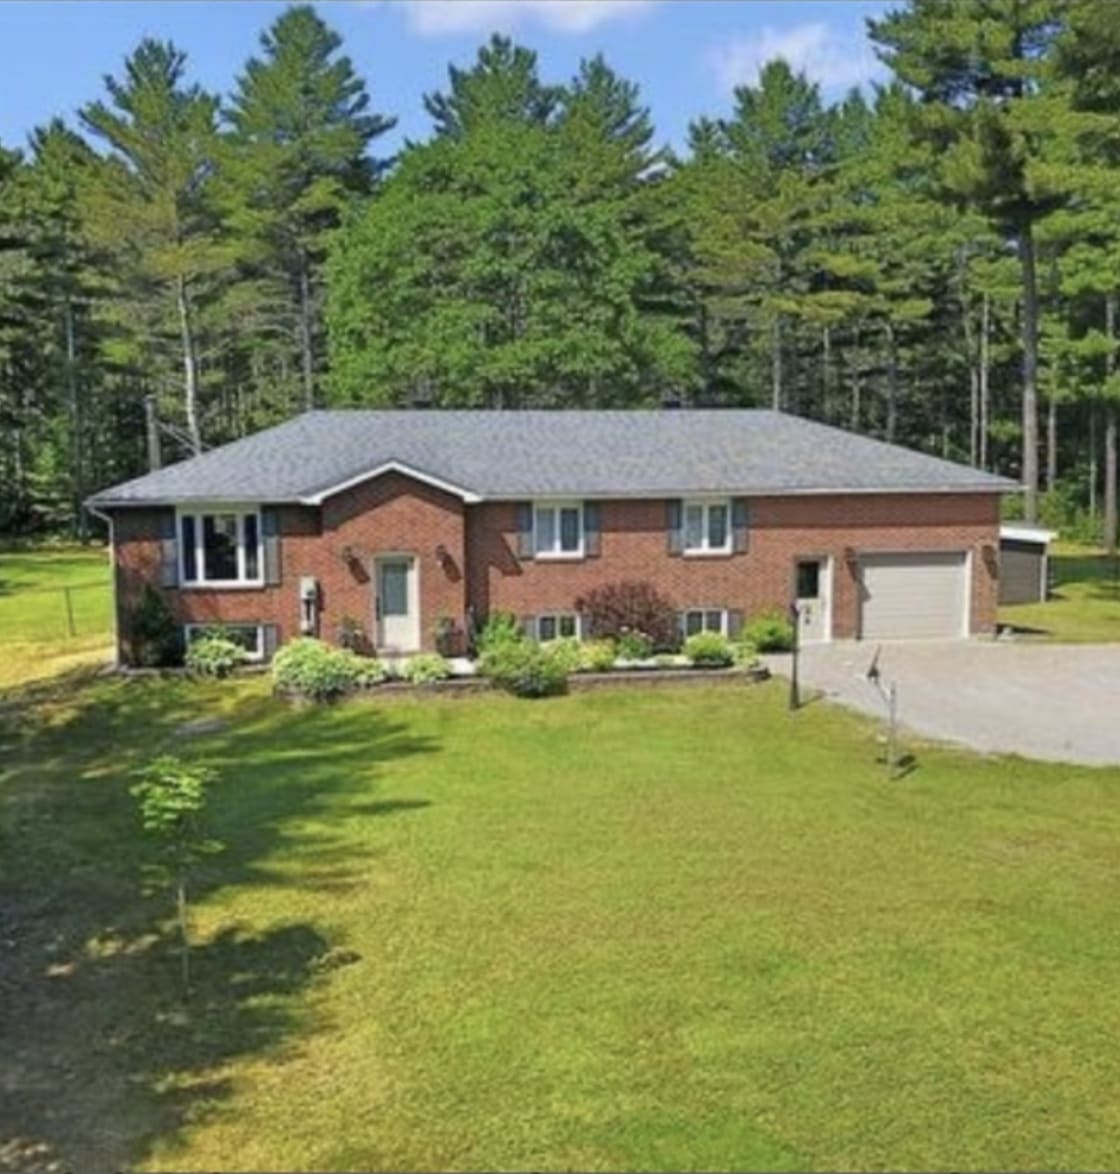 Home Base is on a 1 Acre property backing onto a pine forest and the Heritage Trail.